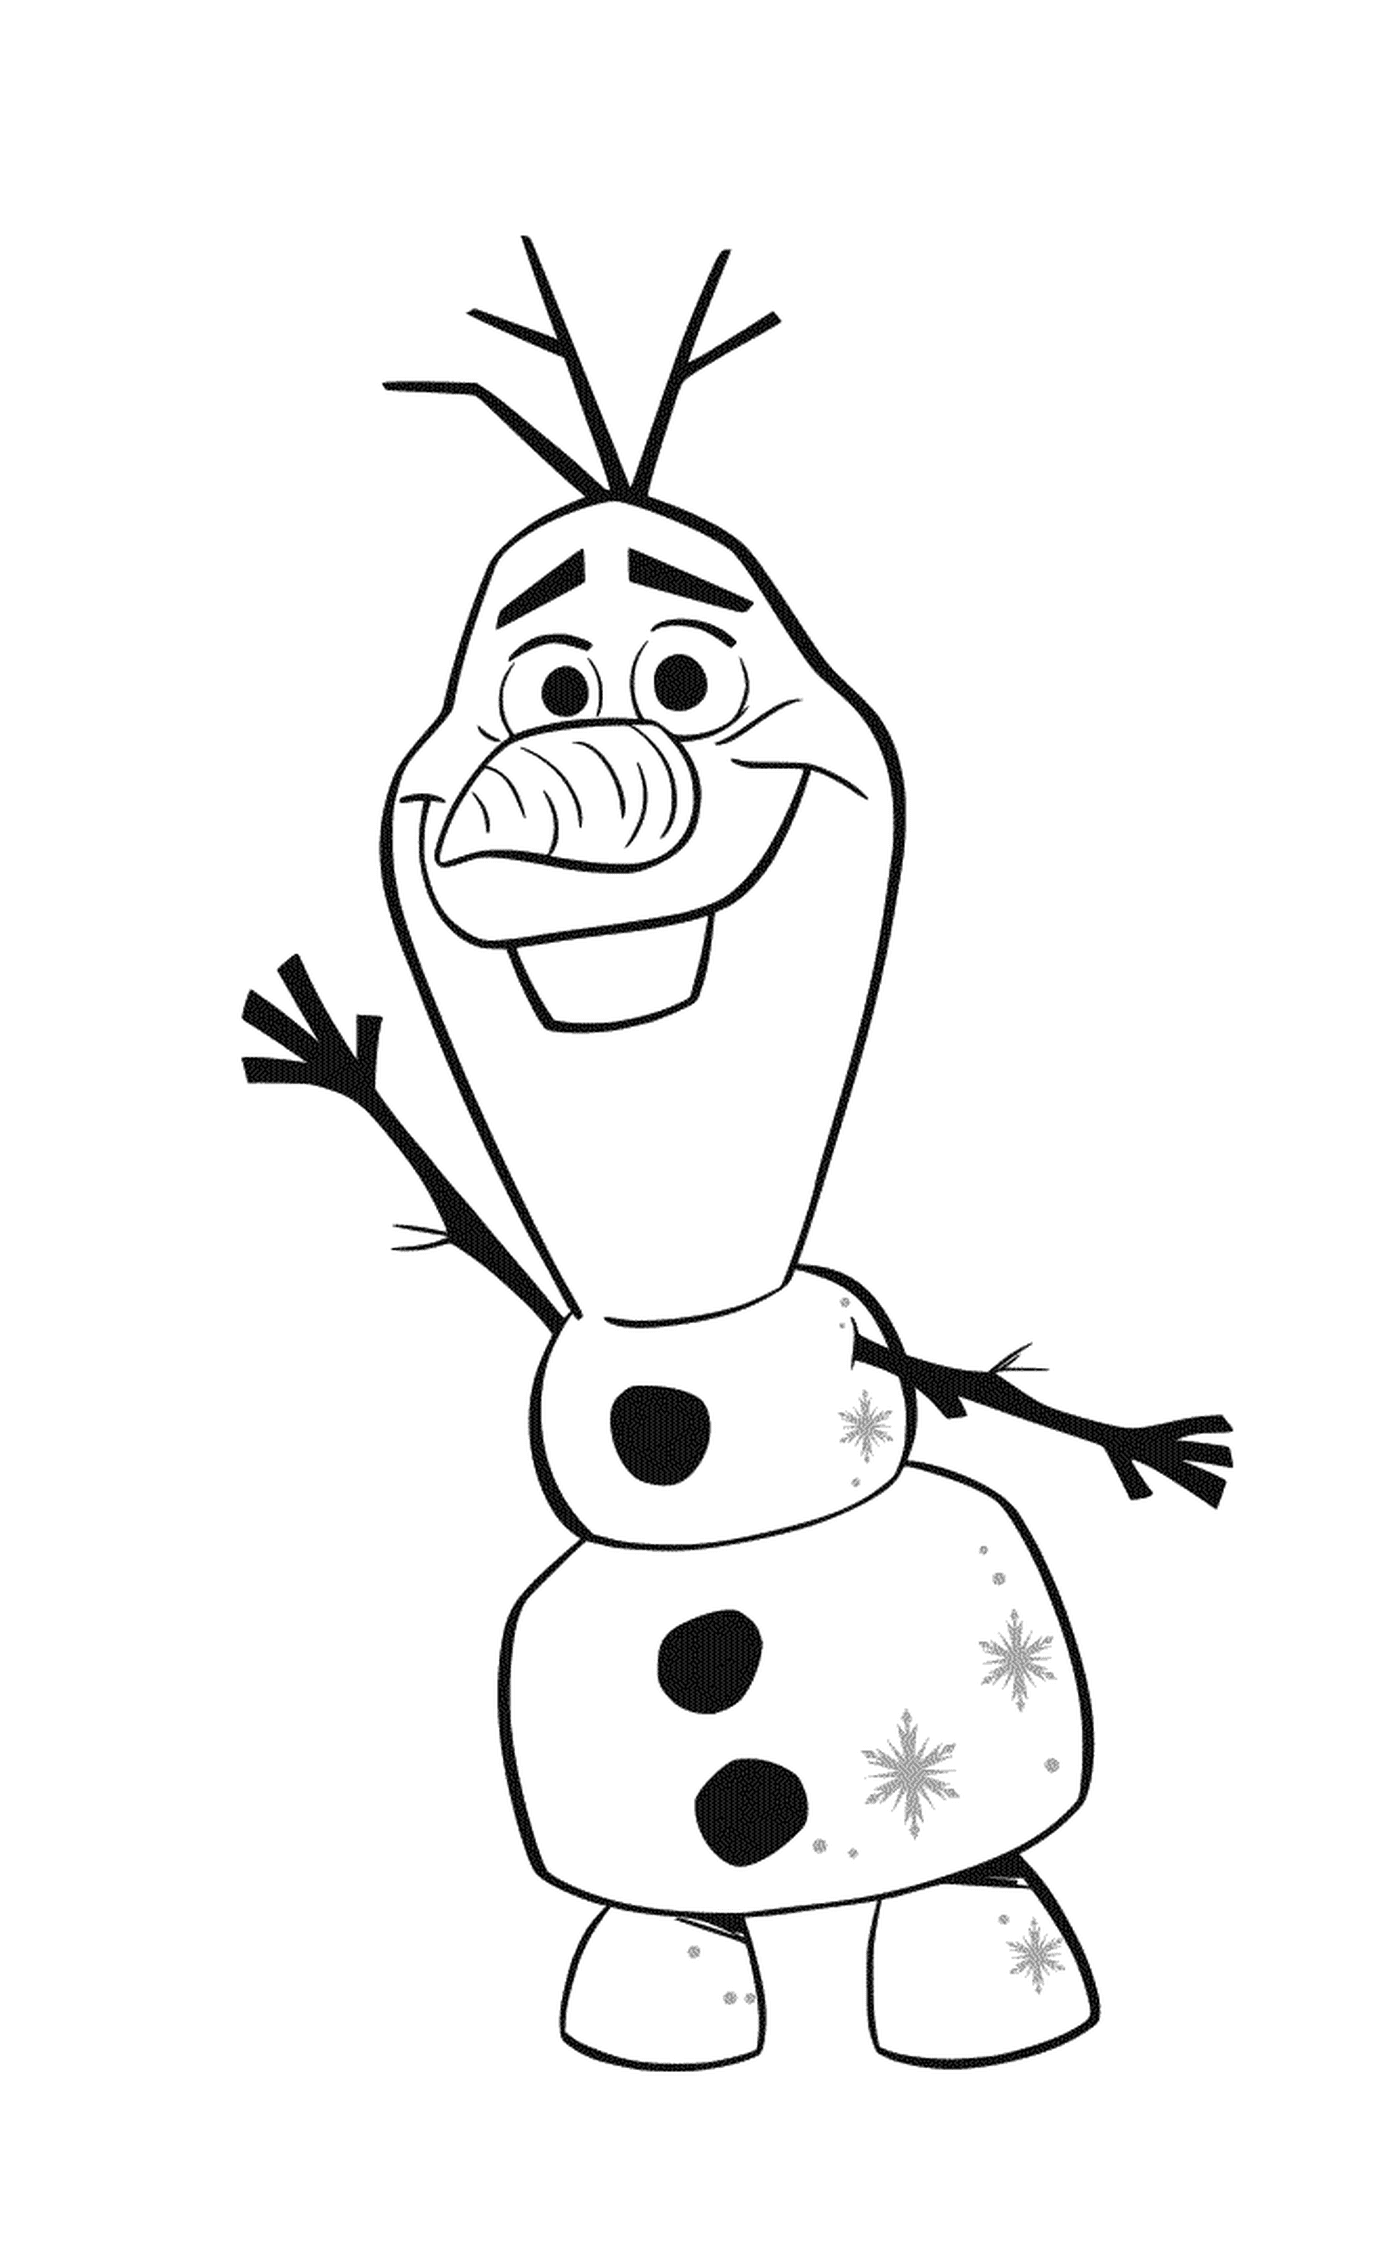  Olaf, the animated snowman of Elsa and Anna's childhood 